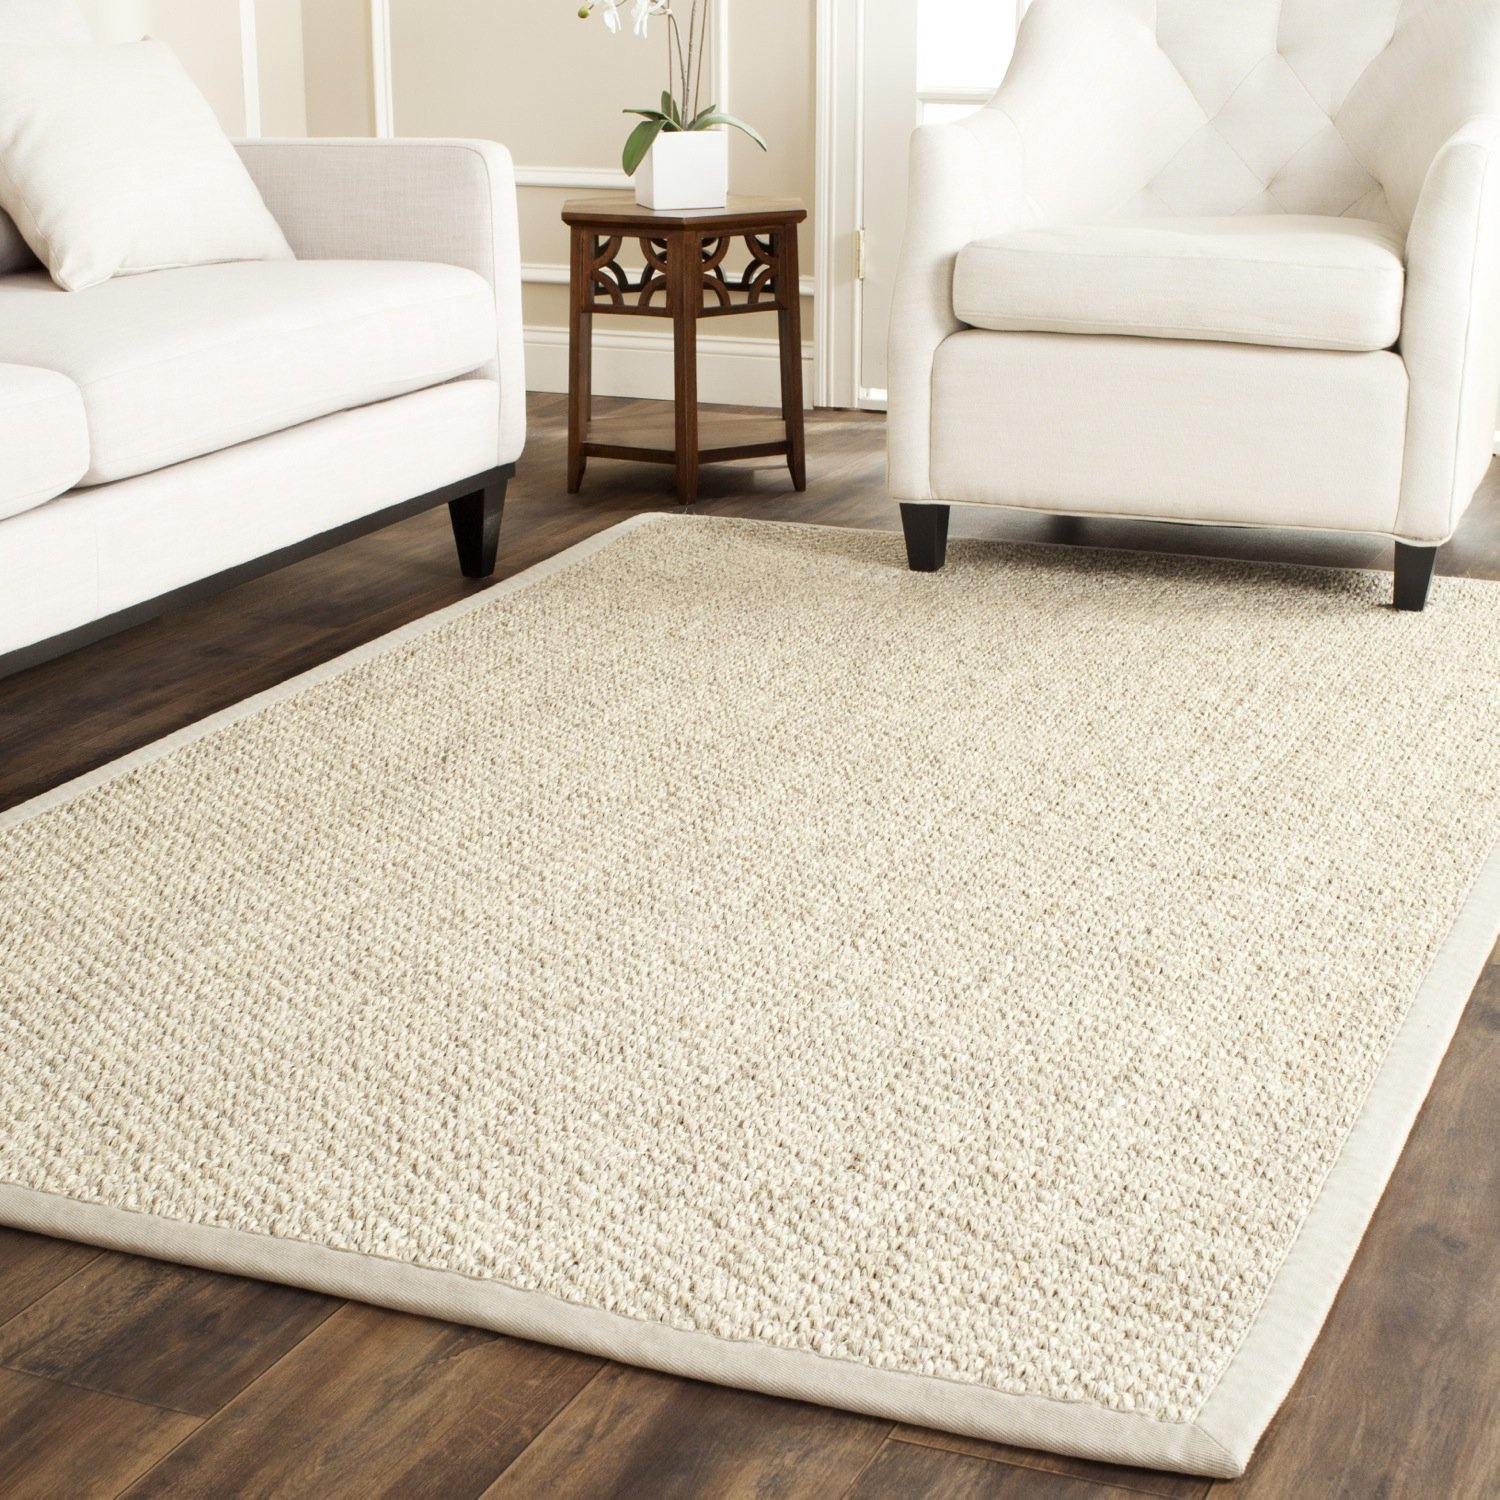 Safavieh Natural Fiber Collection NF525C Marble Sisal Area Rug (4' x 6')